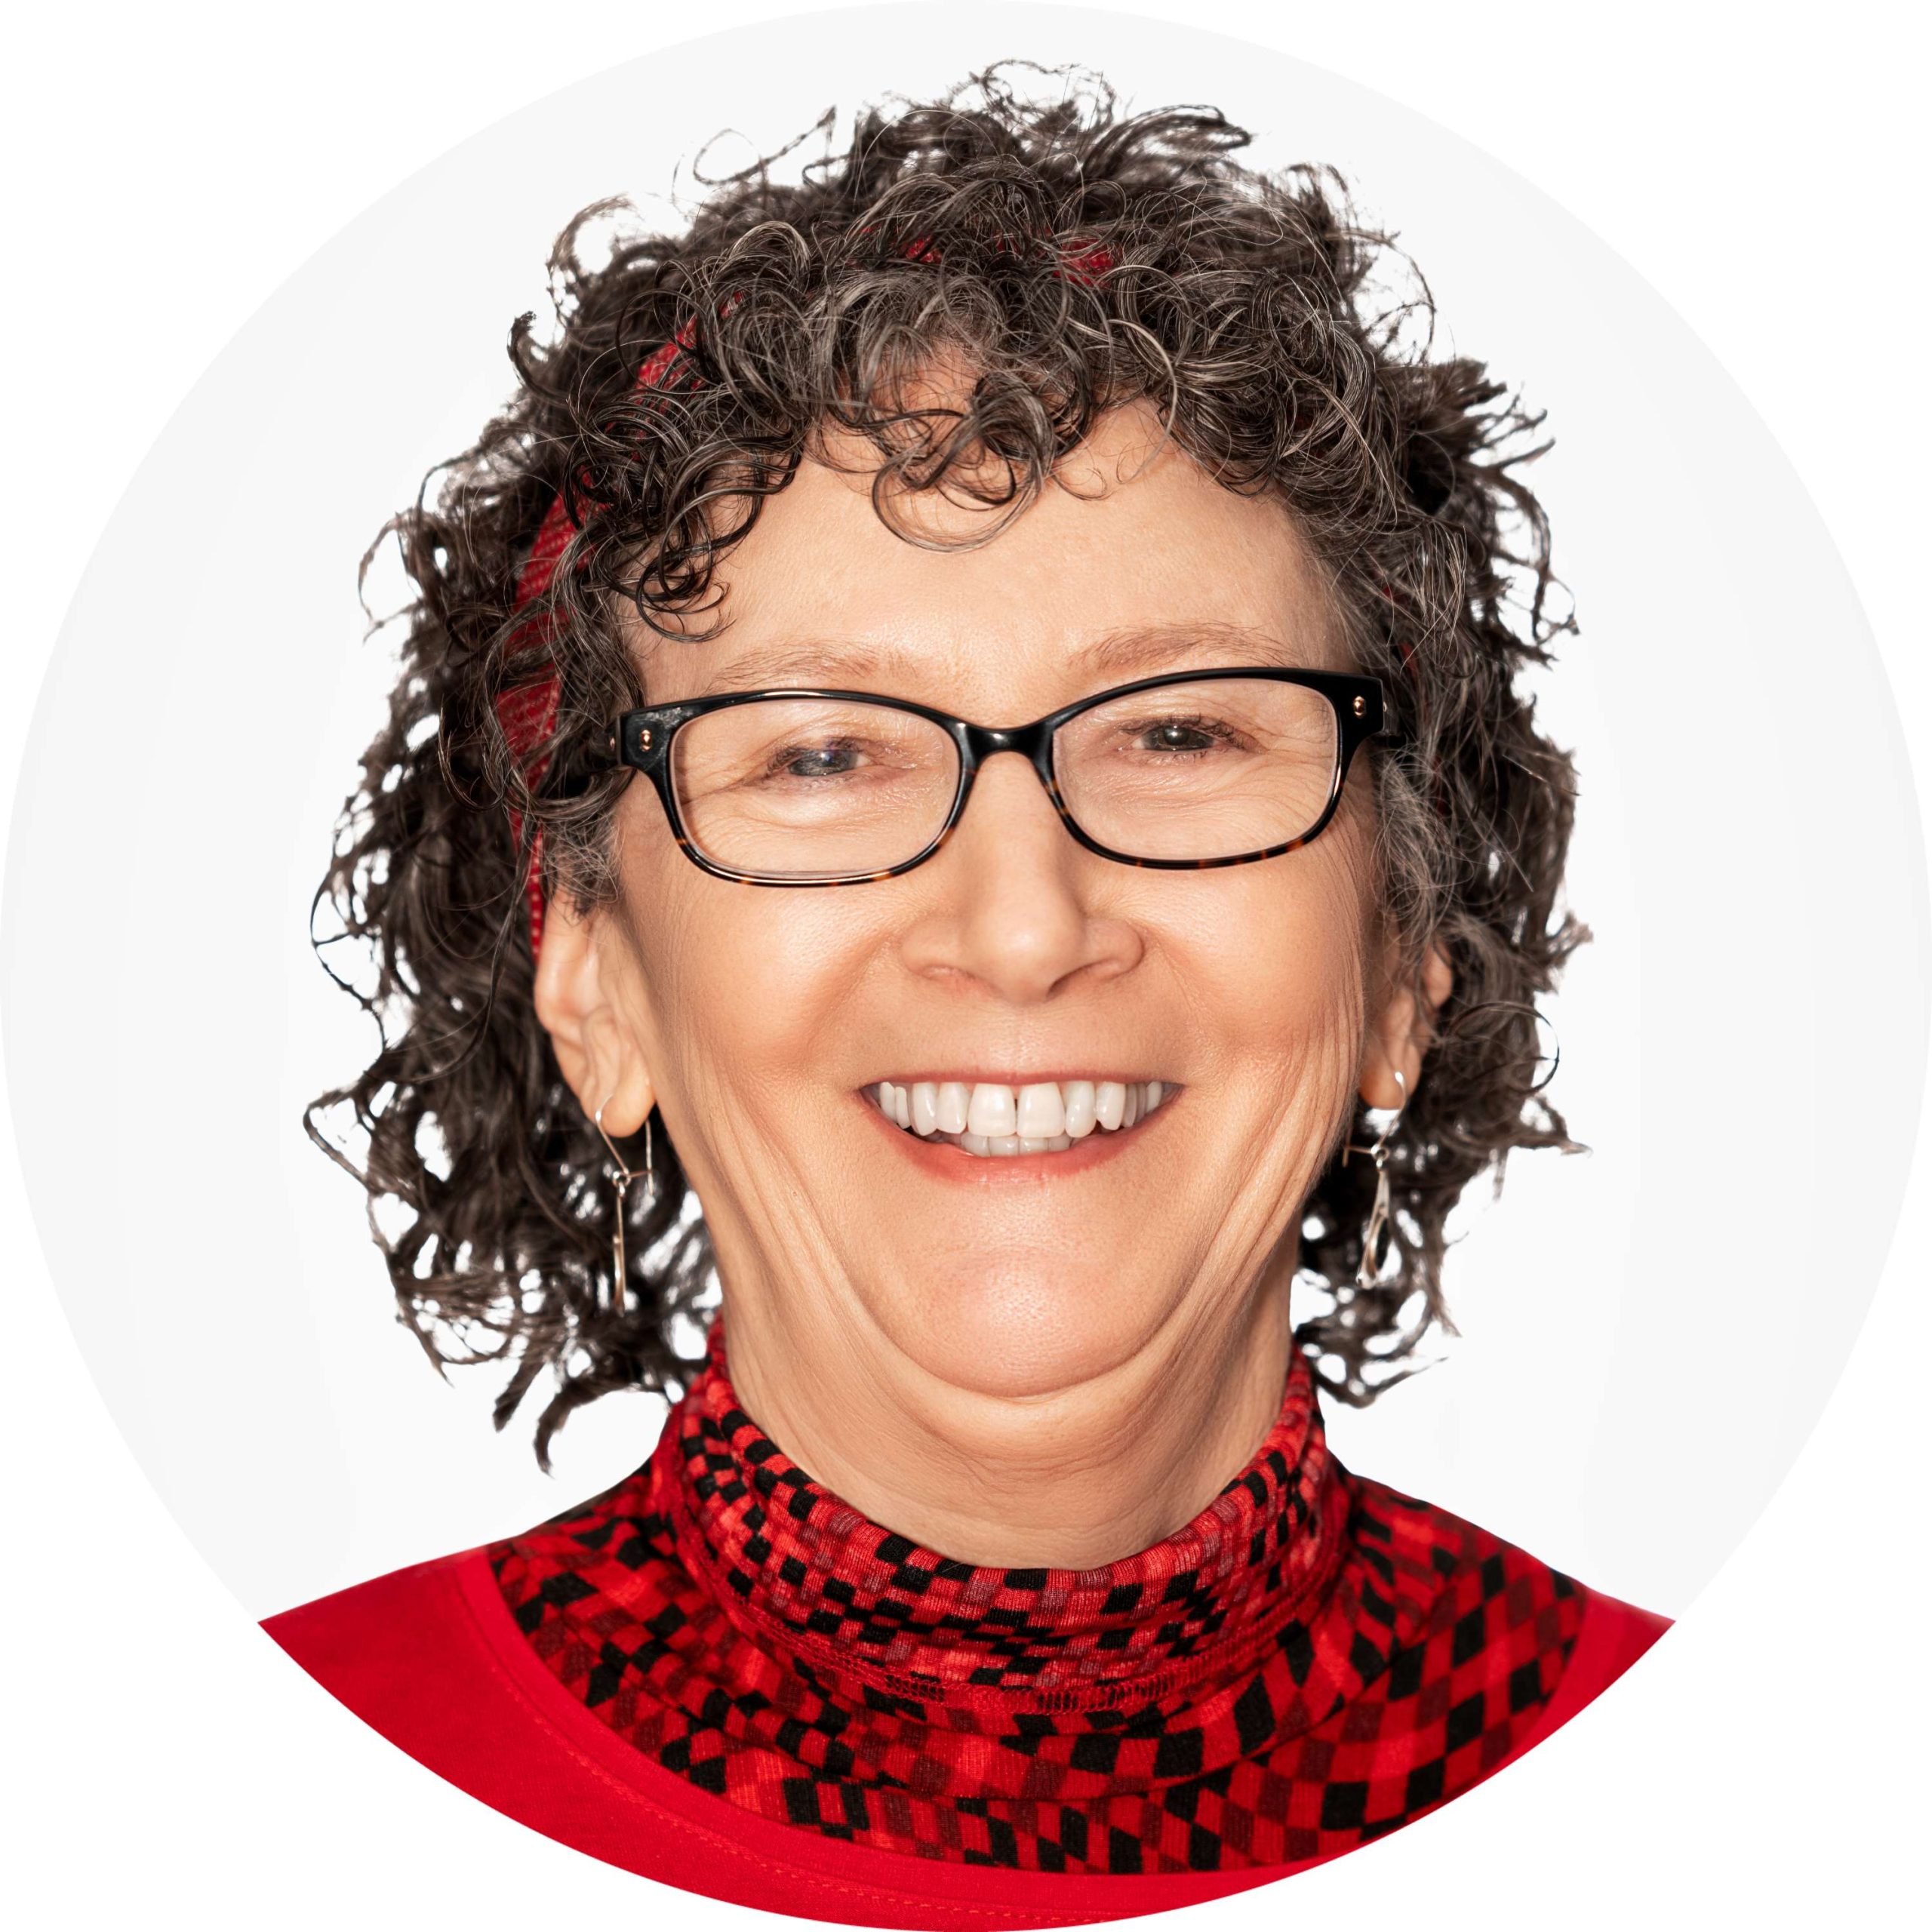 Terri Neff, female, with short curly hair, wearing glasses and a red sweater and red turtleneck